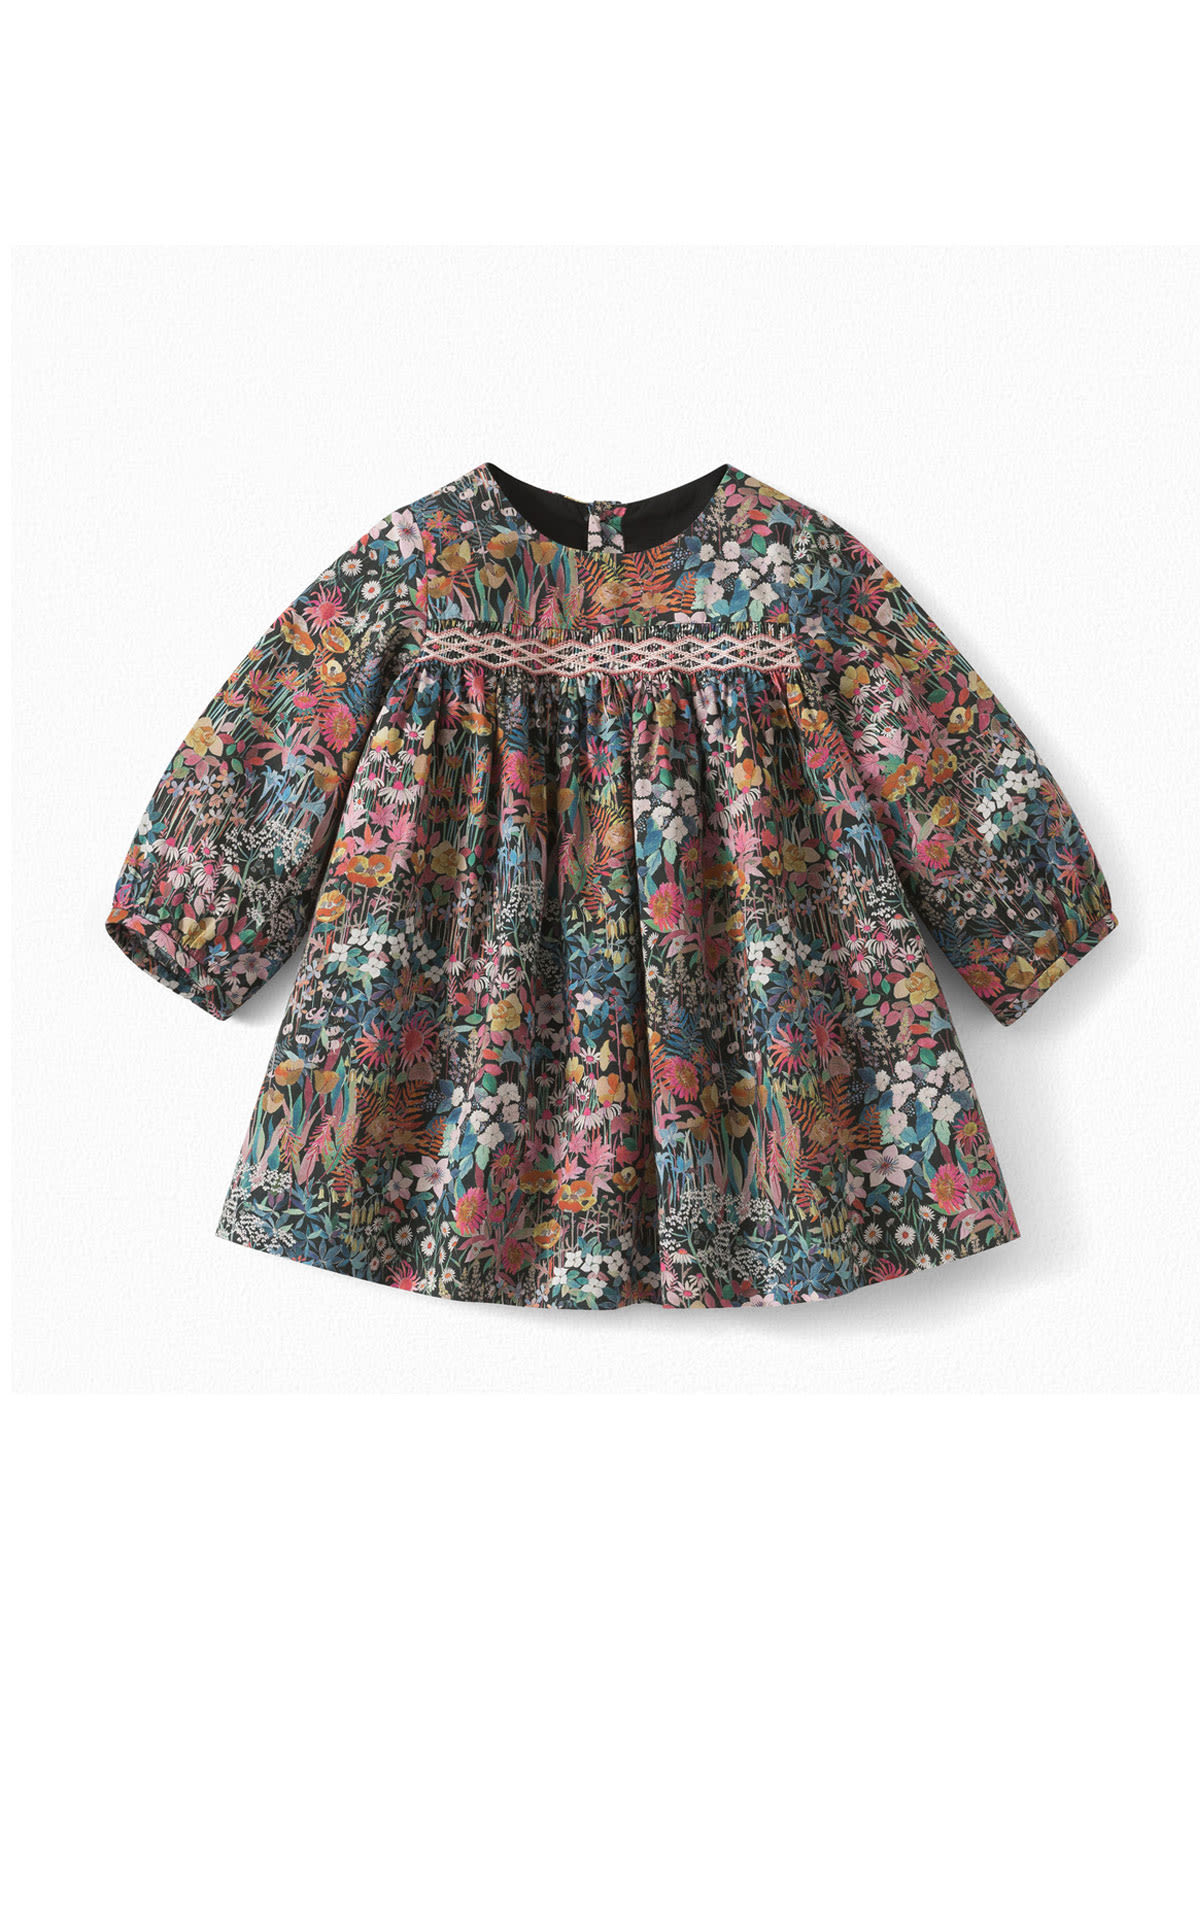 Bonpoint Felicie floral dress from Bicester Village